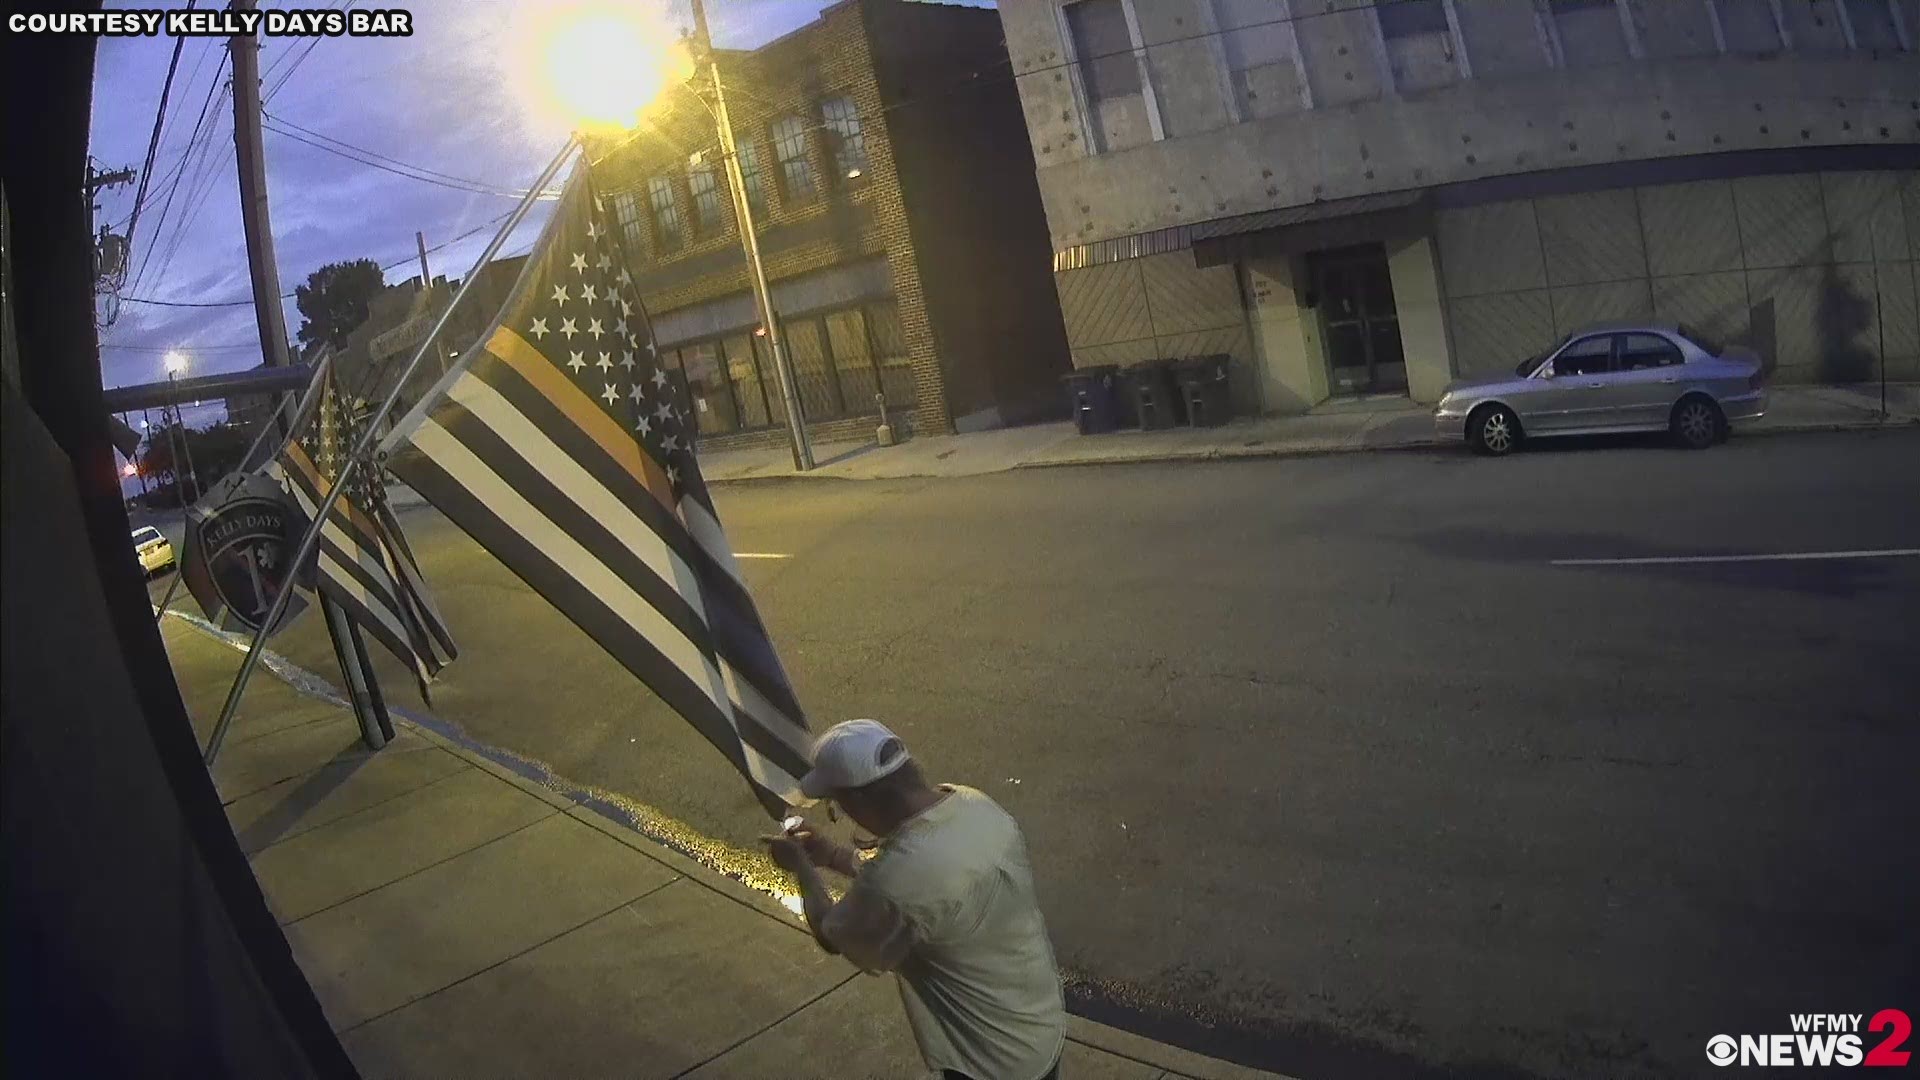 Winston-Salem police are searching for a High Point man they believe tried to burn two American 'Blue Line' flags hanging outside a bar popular among police and first responders.